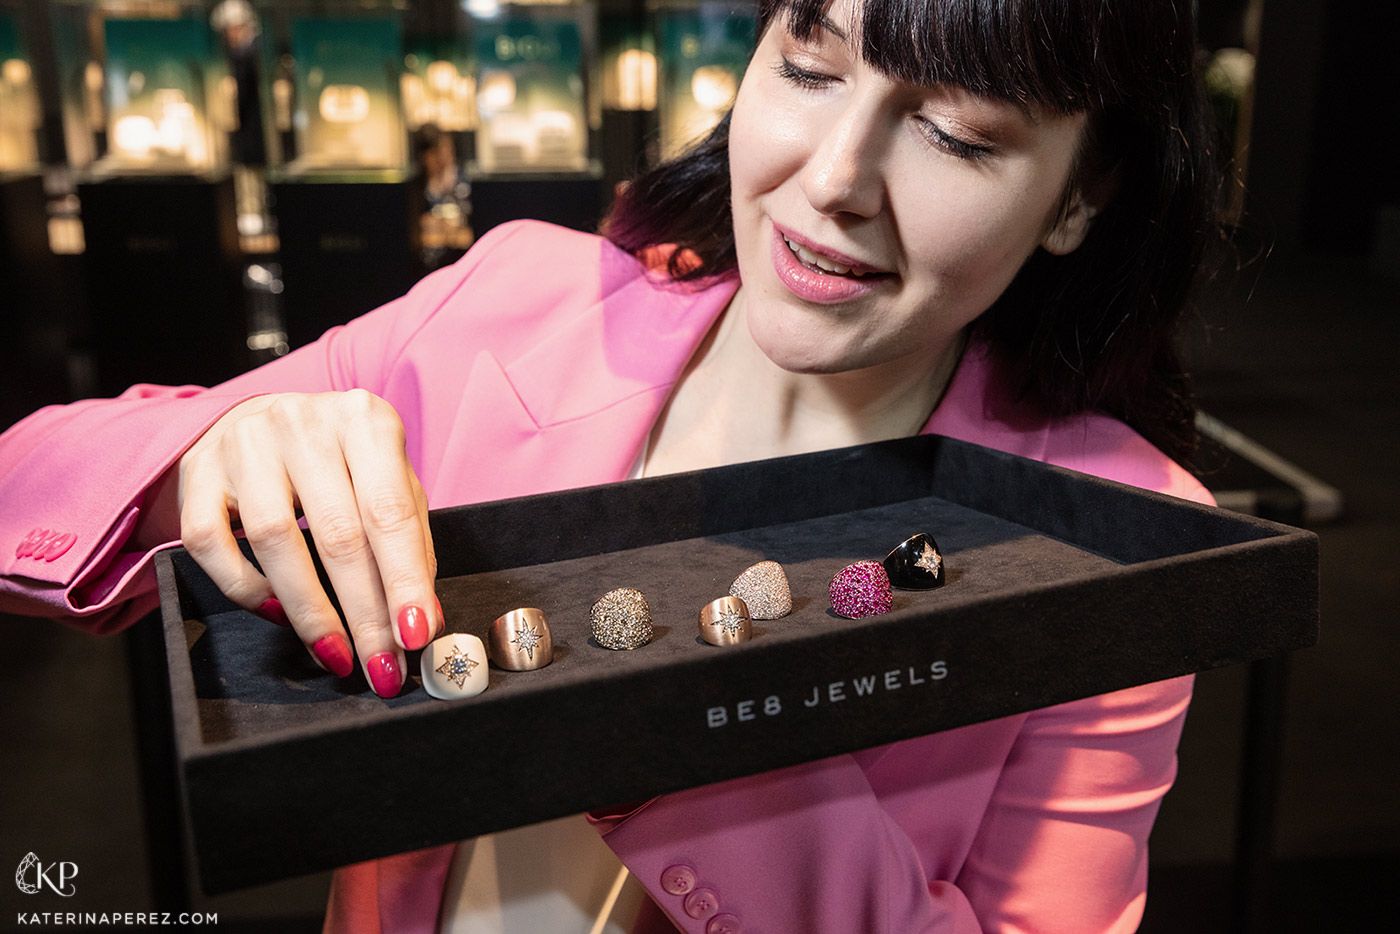 Katerina Perez showcases rings from the BE8 Jewels Customise Your Dreams collection